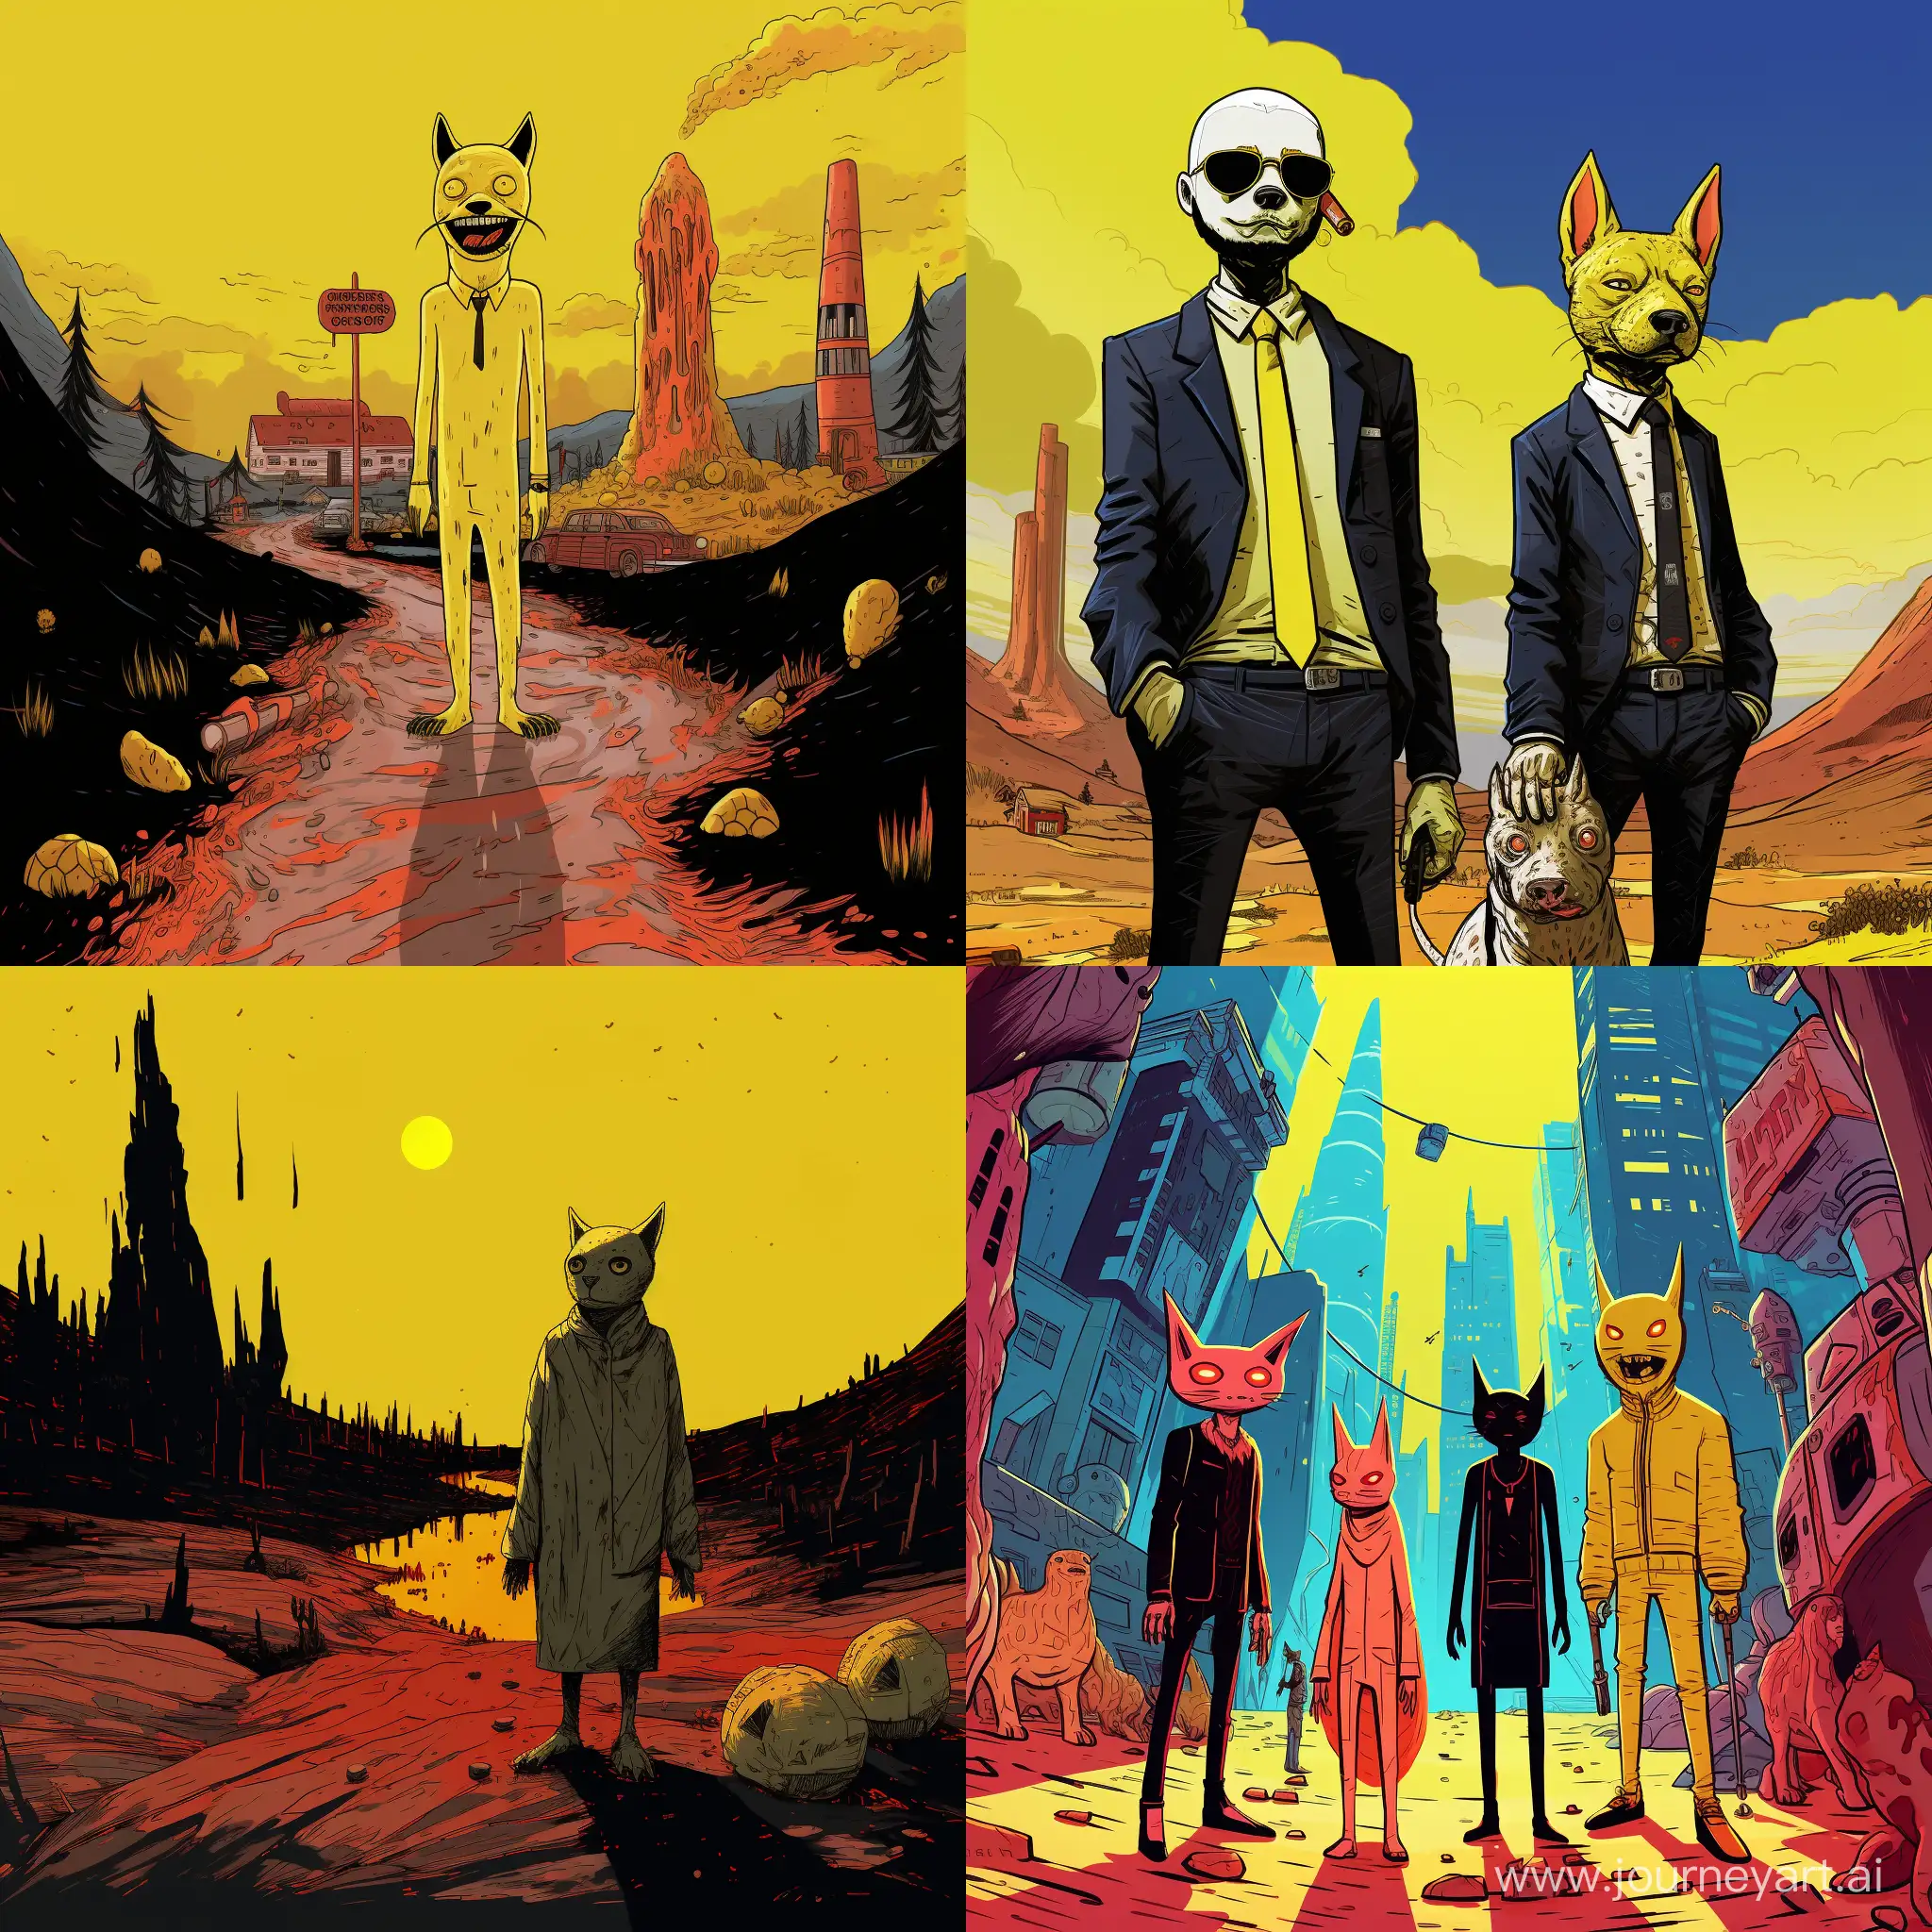 Hylics-Video-Game-Fan-Art-Abstract-AR-Scene-with-Mysterious-Elements